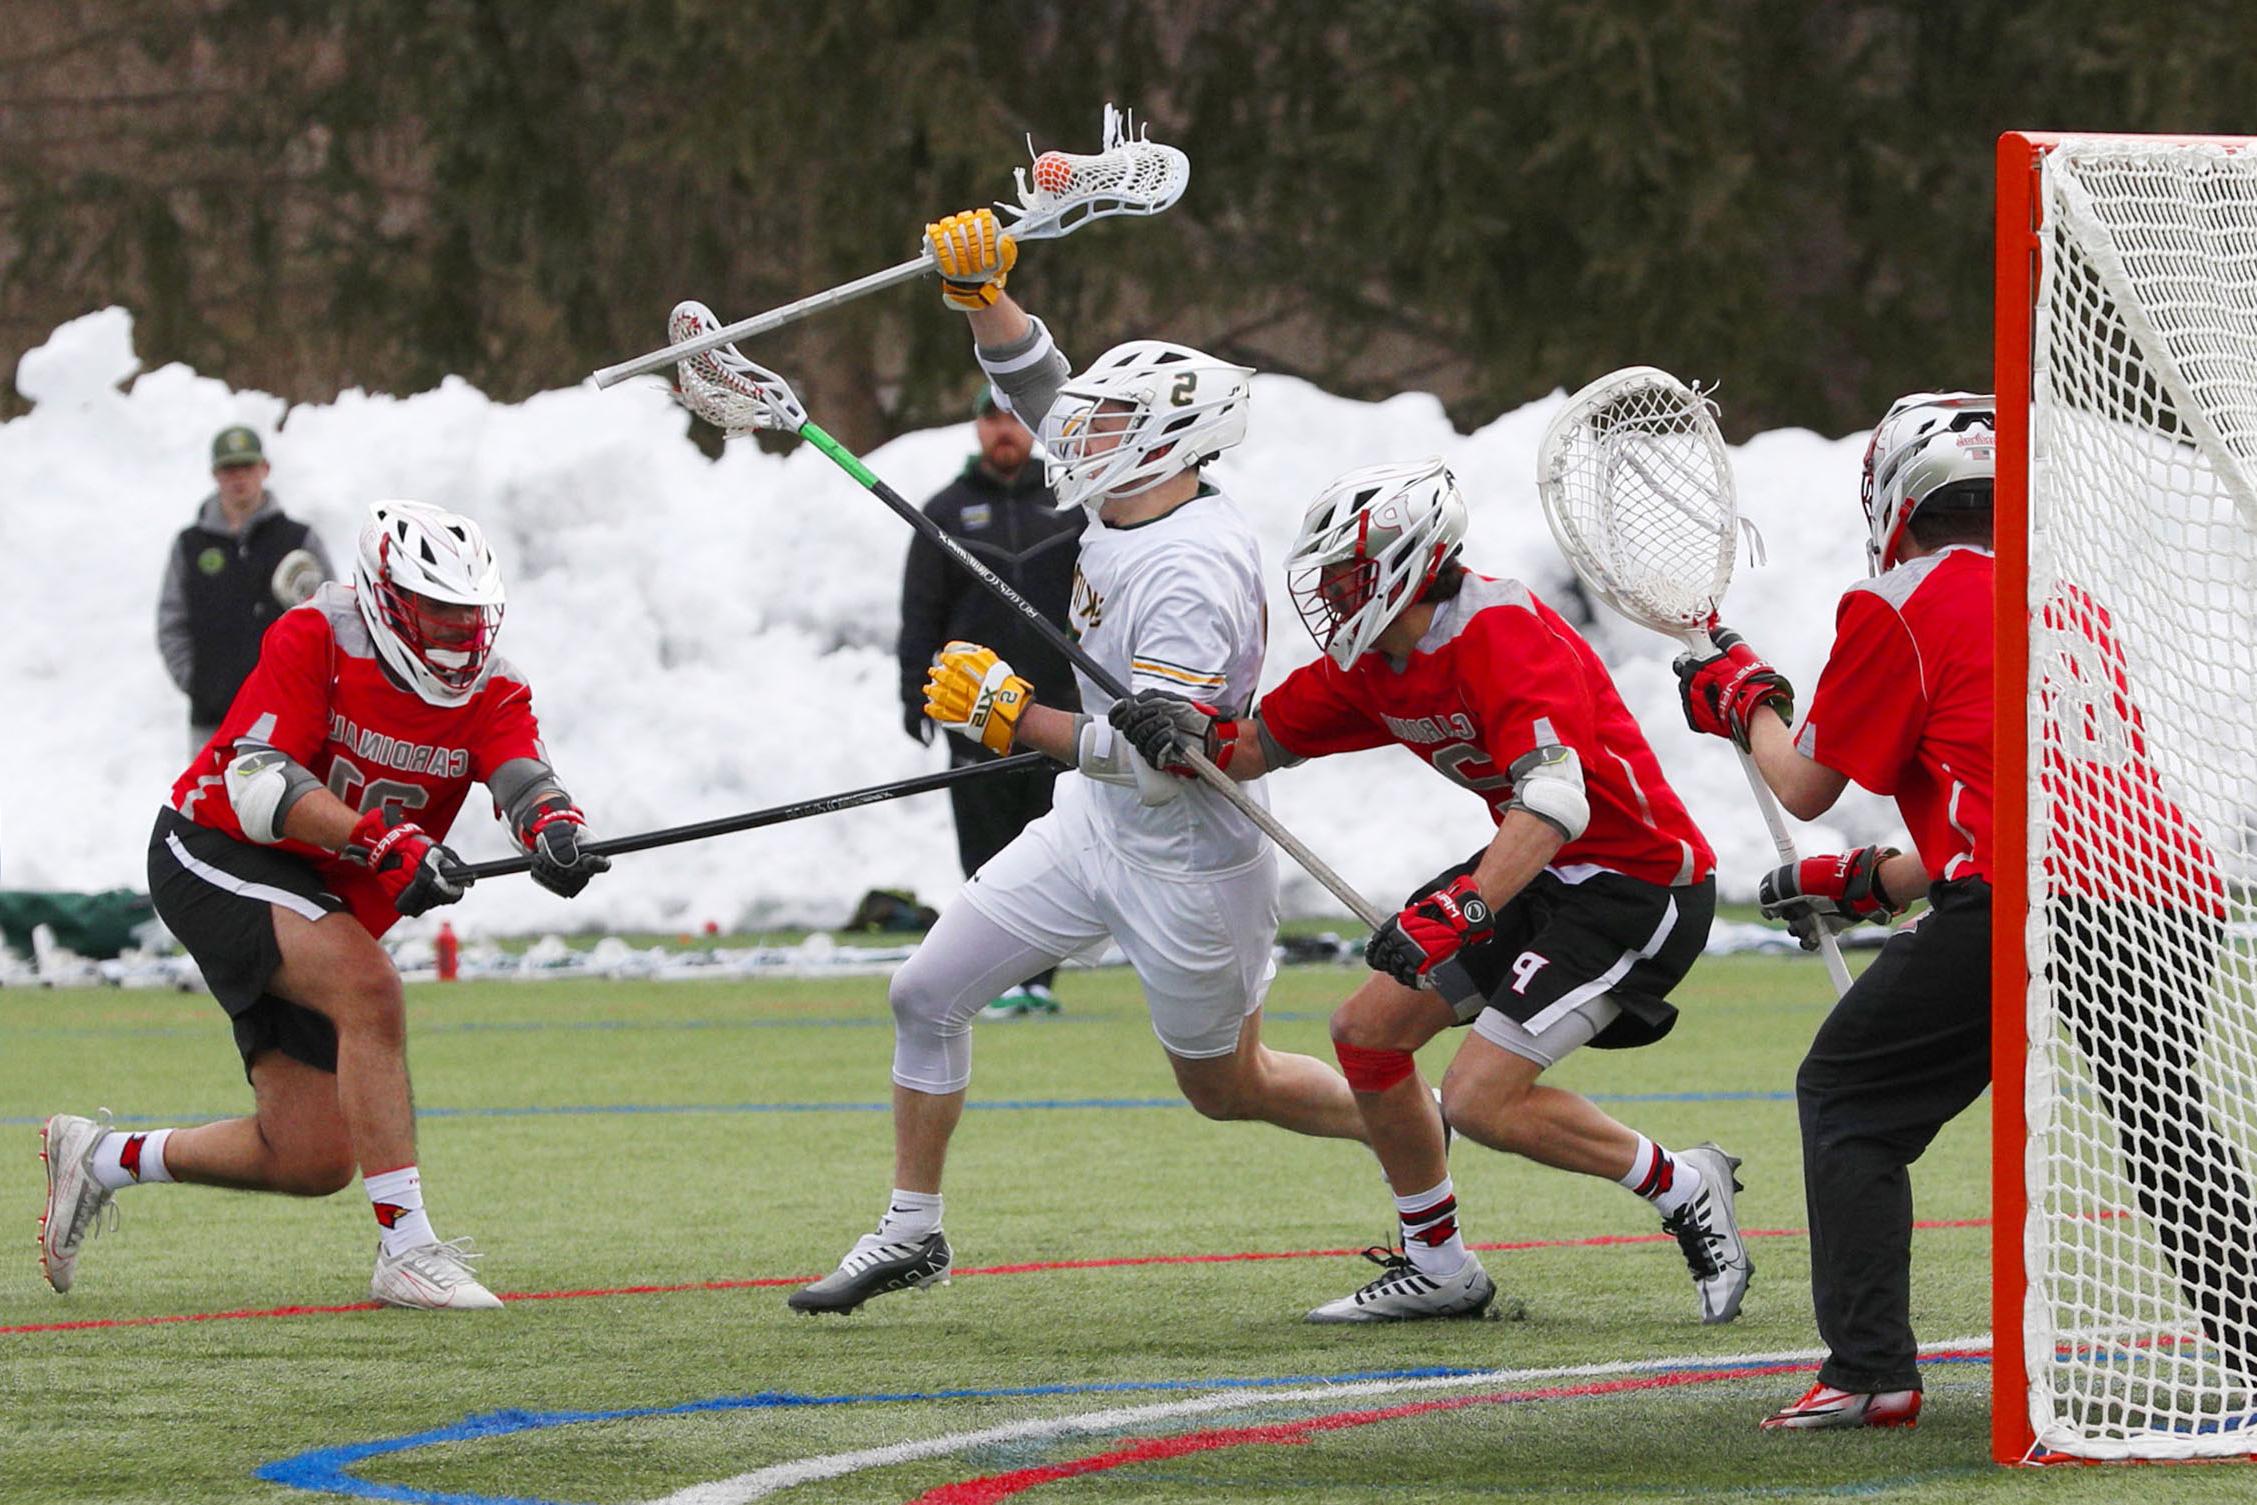 a scene of multiple men's lacrosse players in action during a game